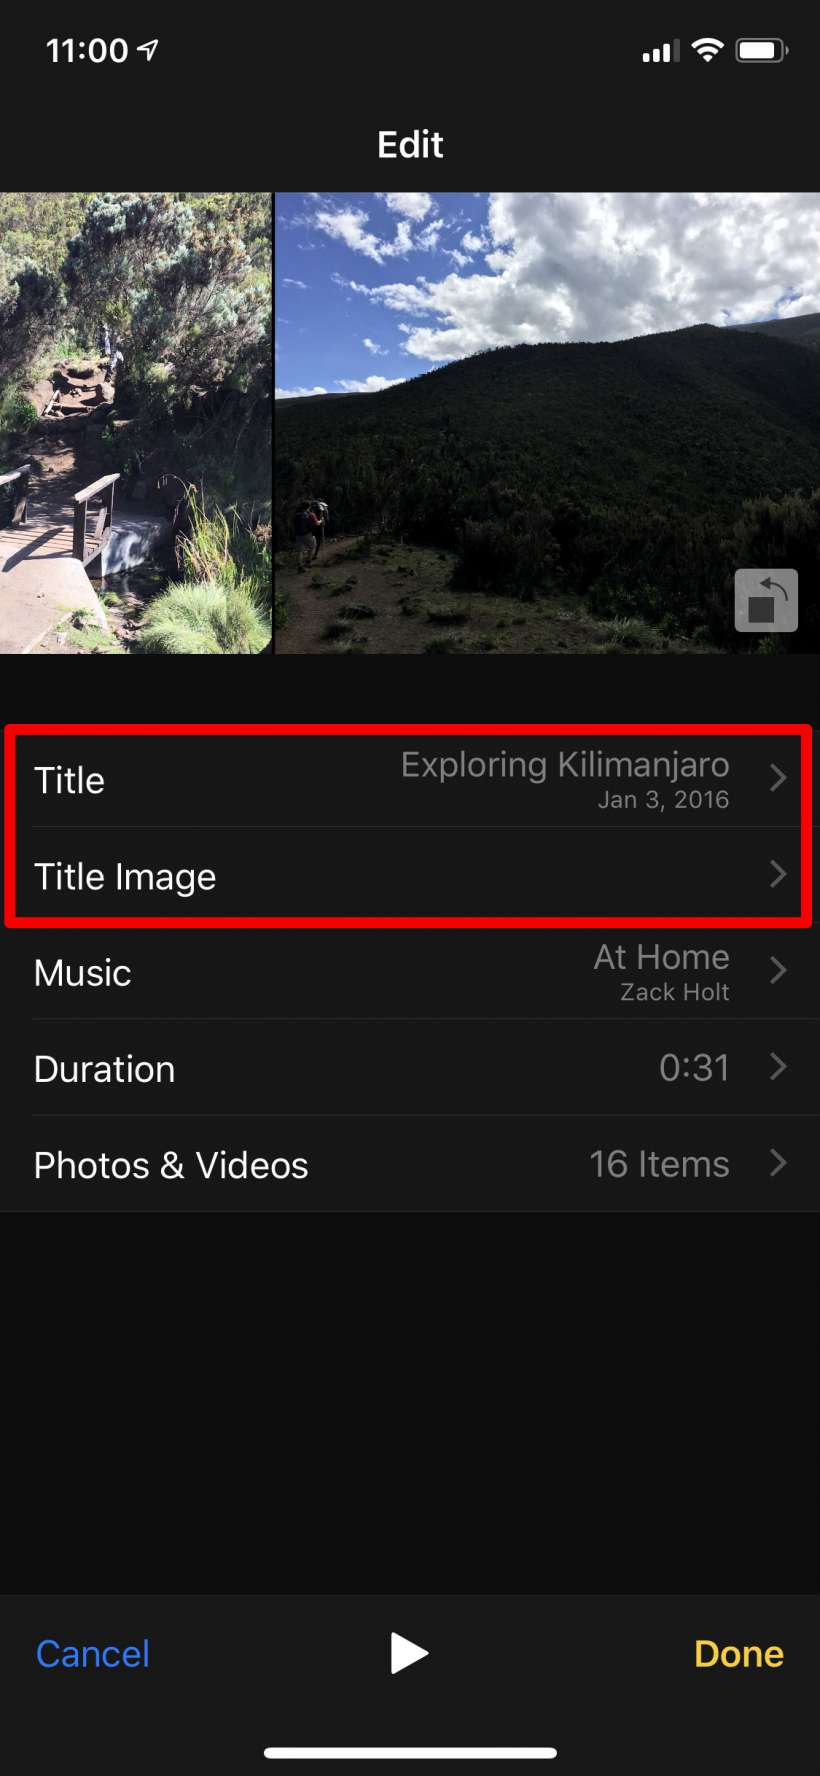 How to edit memory movies in Photos on iPhone and iPad.